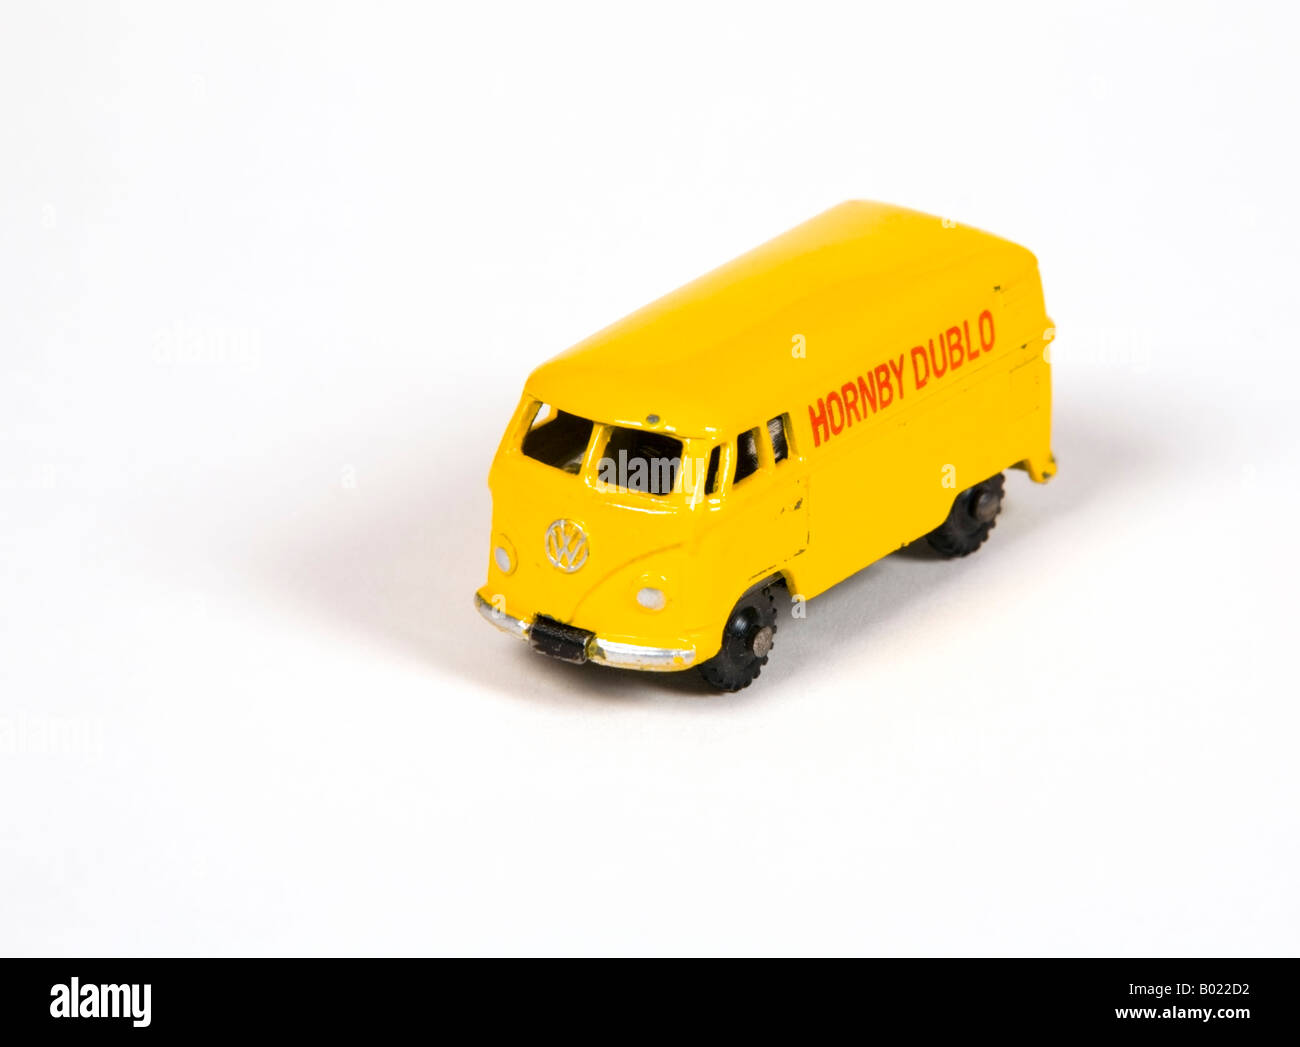 Yellow, toy Dinky Dublo Volkswagen delivery van from the 1960's Stock Photo